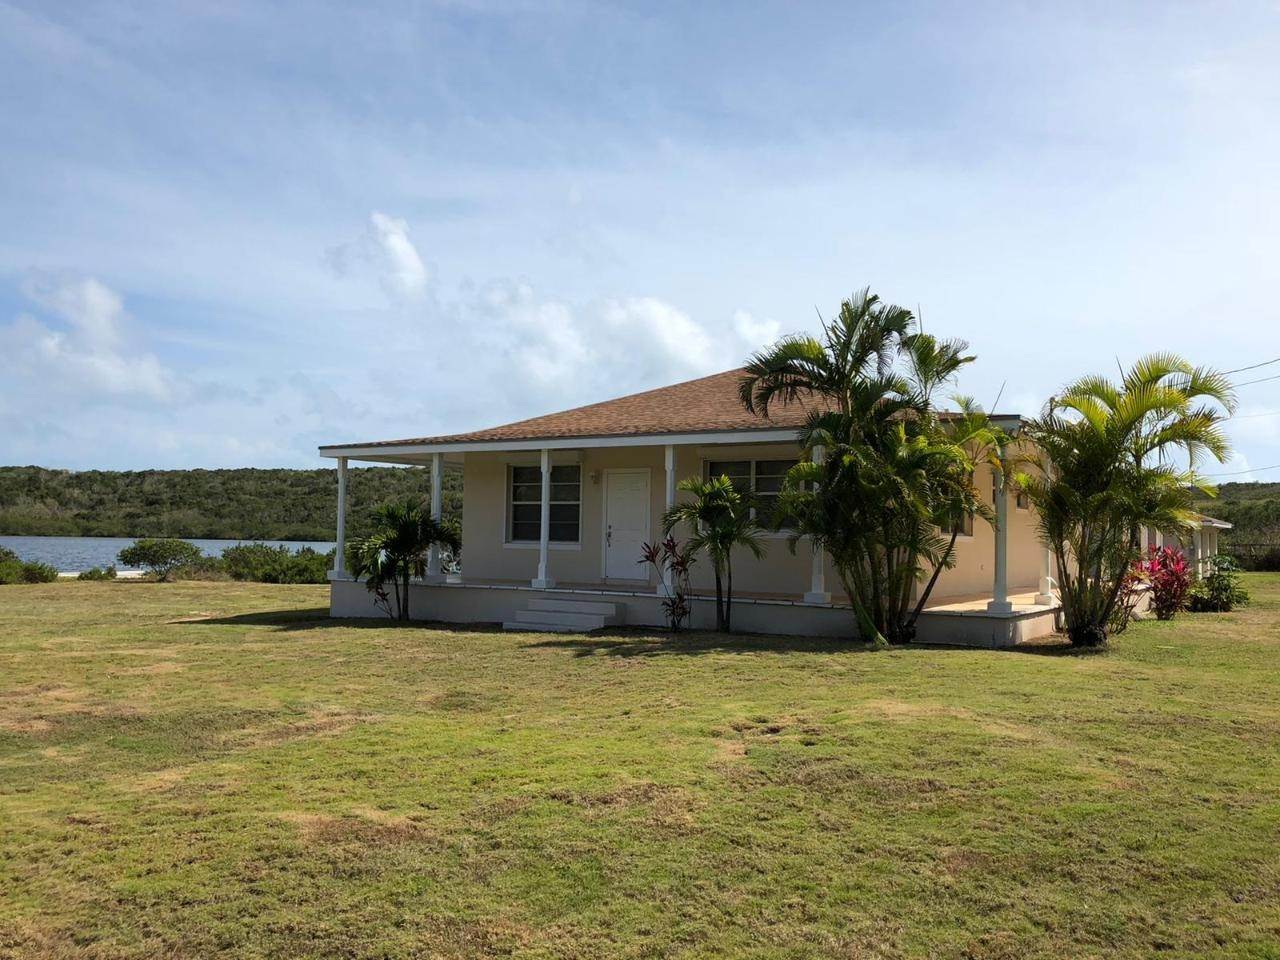 13. Lots / Acreage for Sale at Gregory Town, Eleuthera, Bahamas